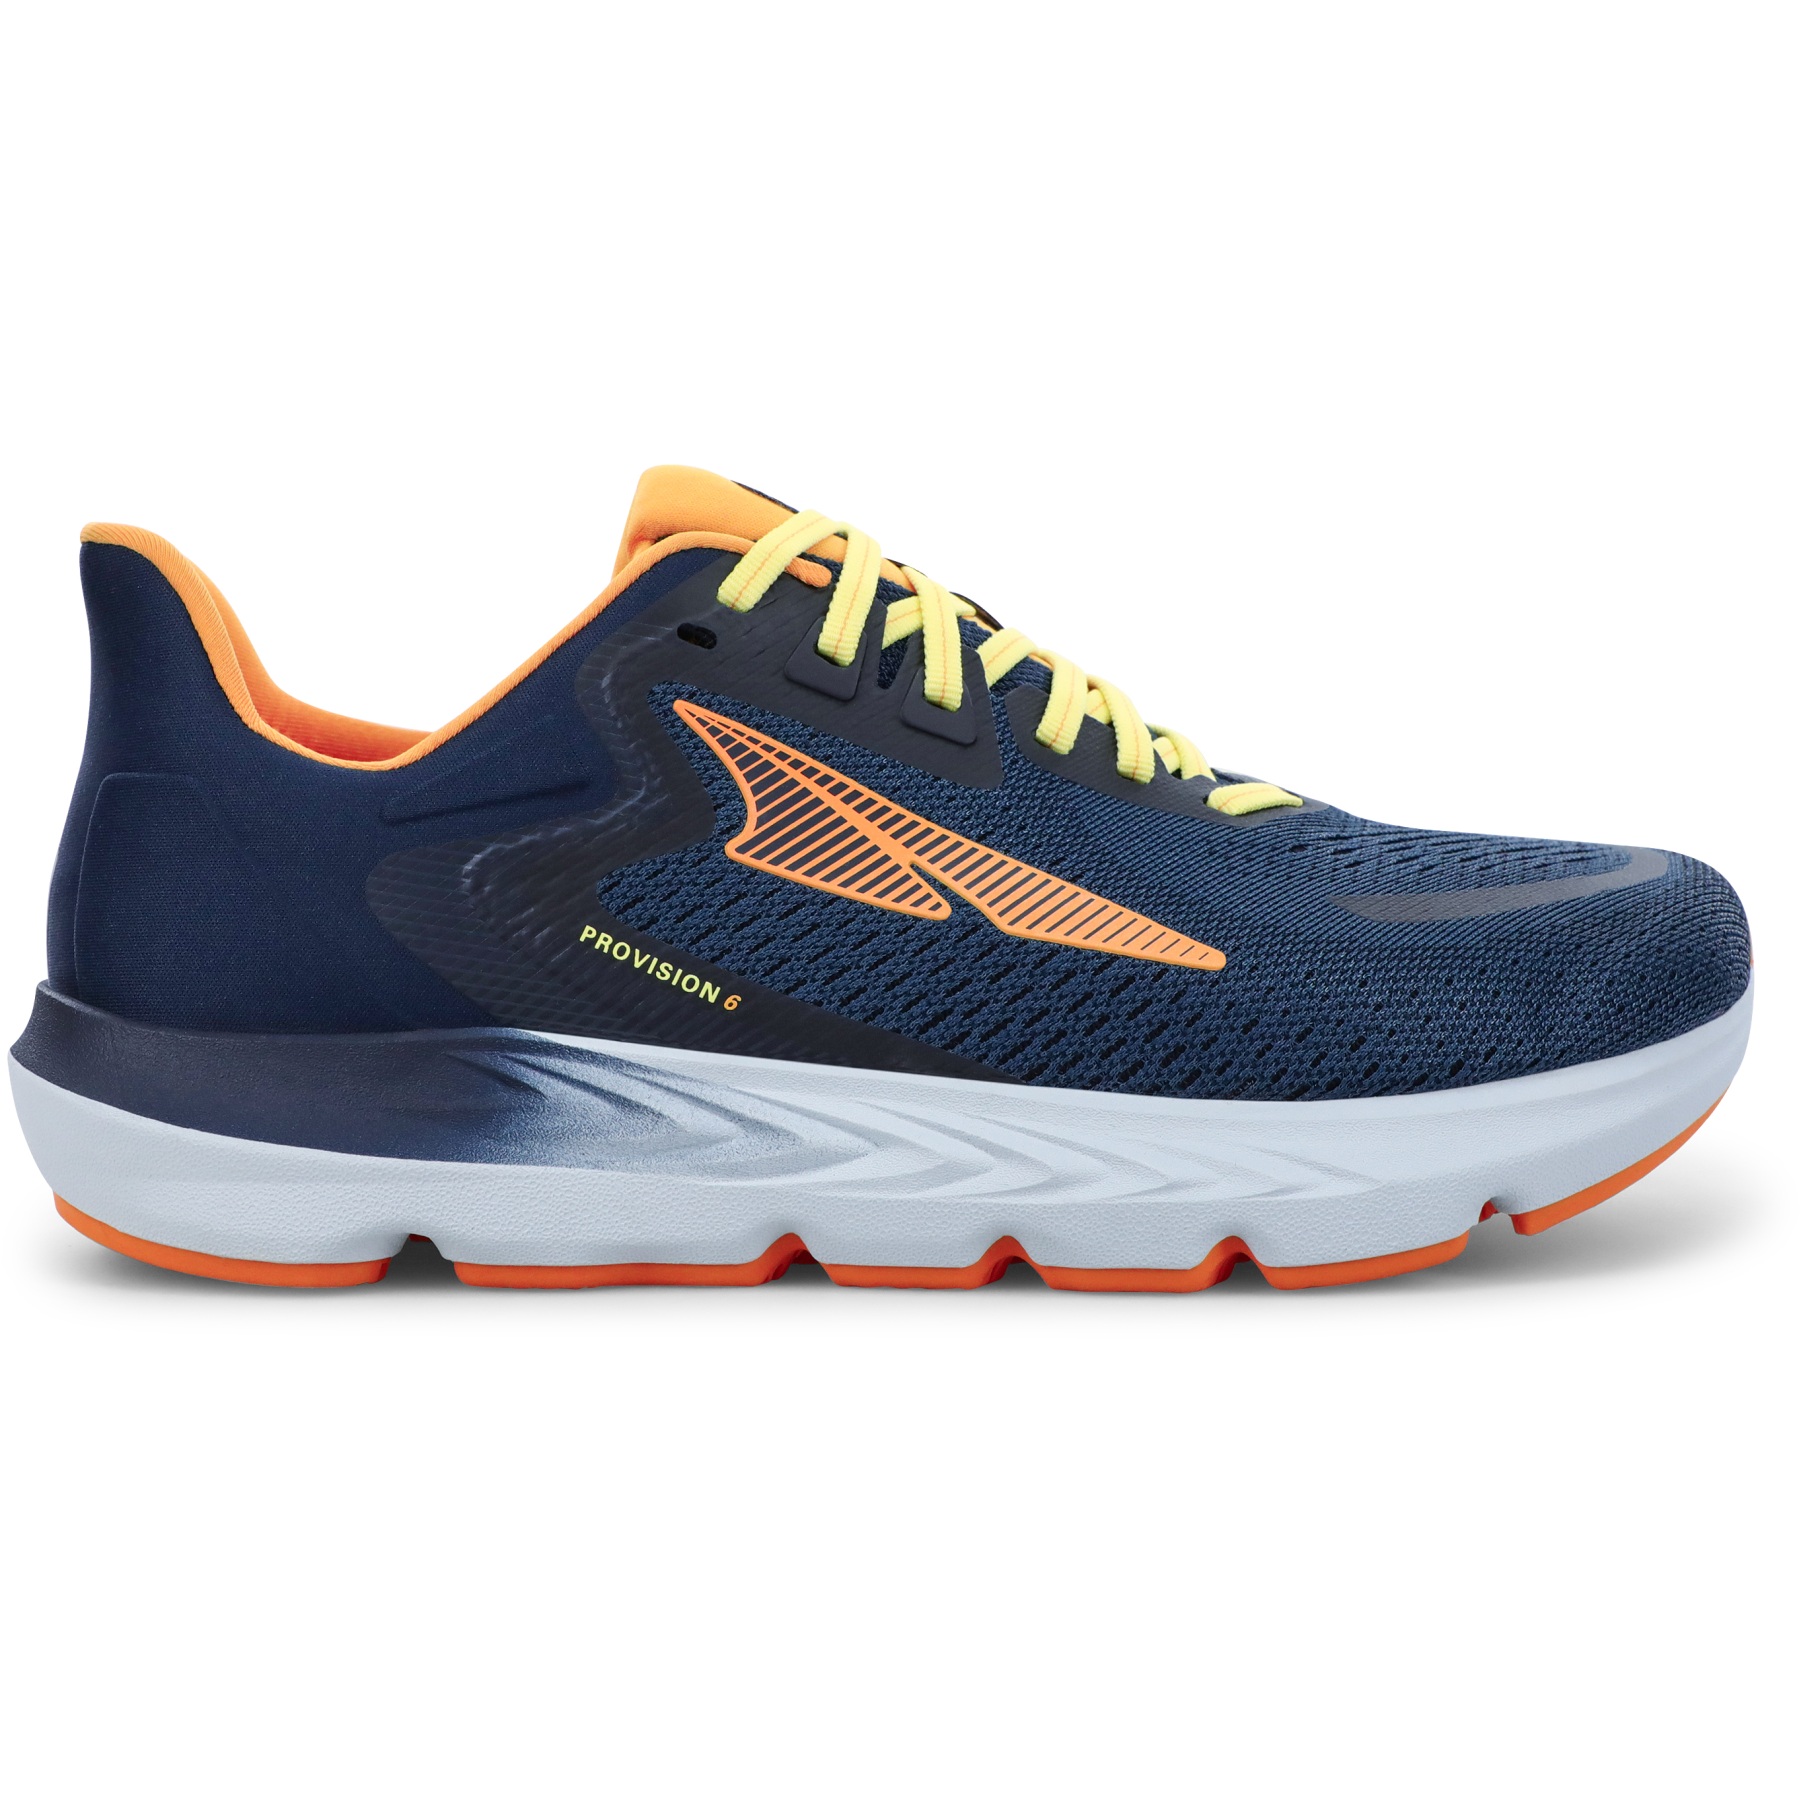 Picture of Altra Provision 6 Running Shoes - Navy